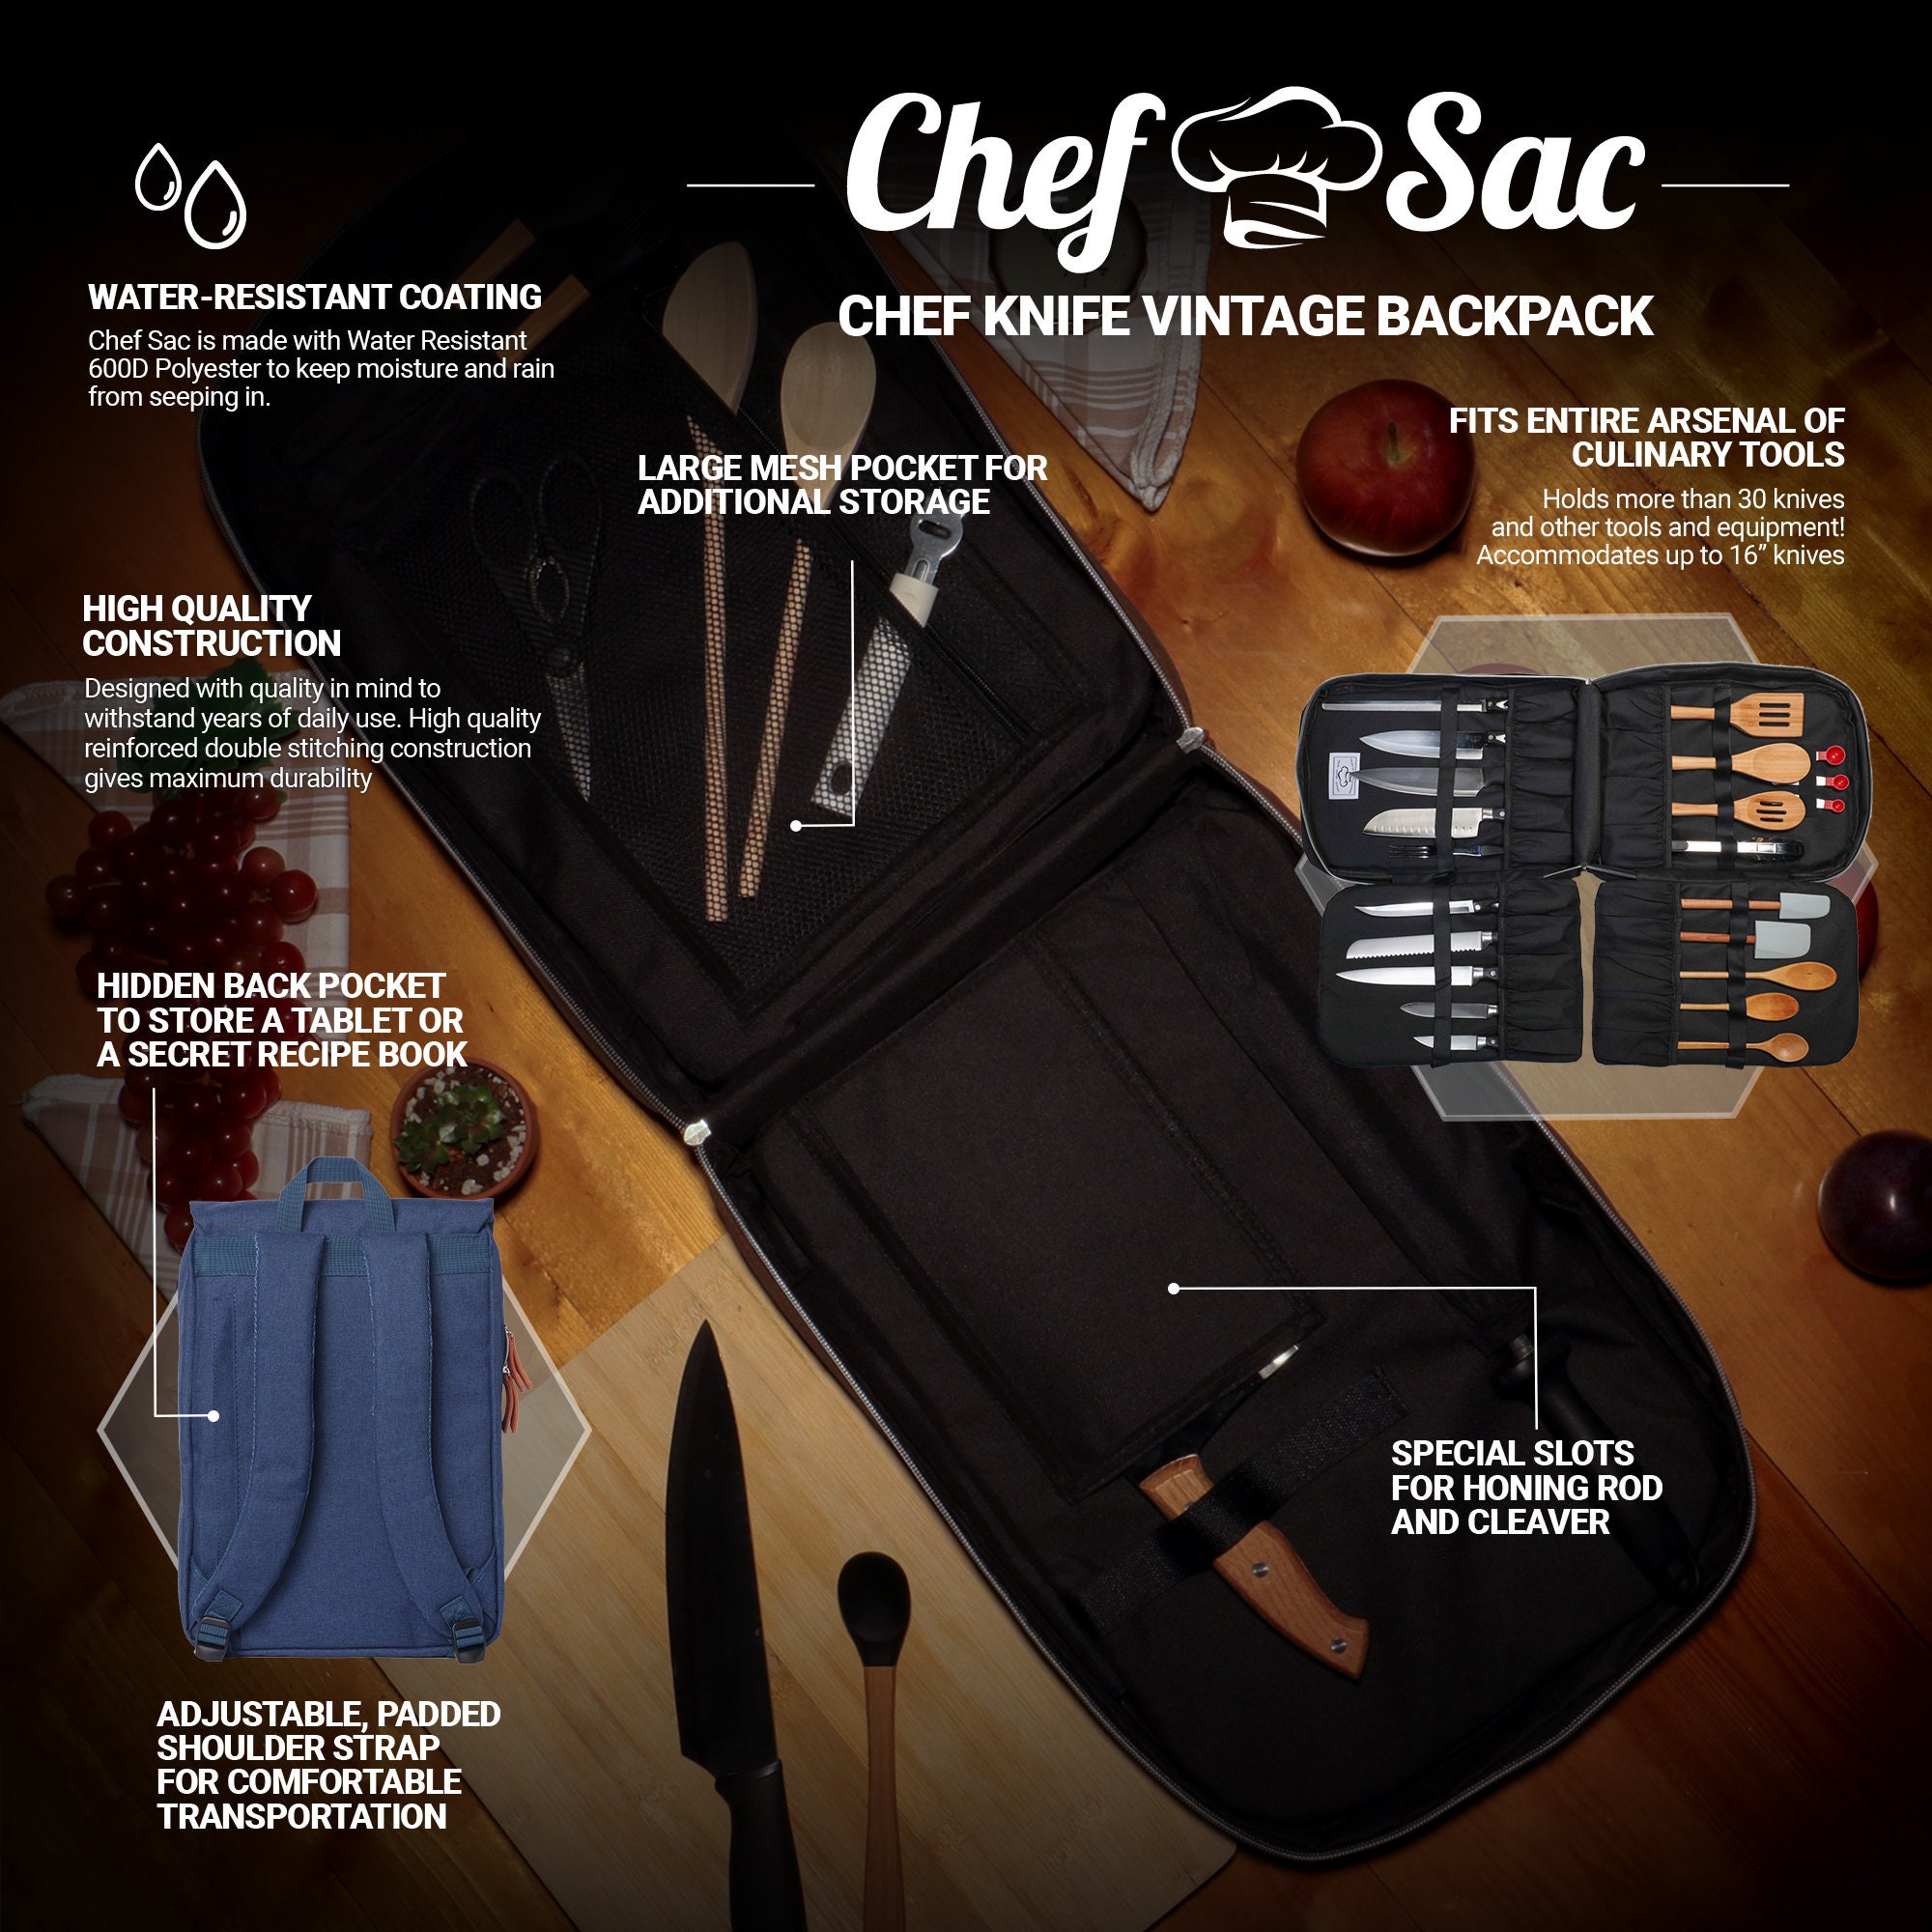 Retro Chef Knife Backpack by Chef Sac